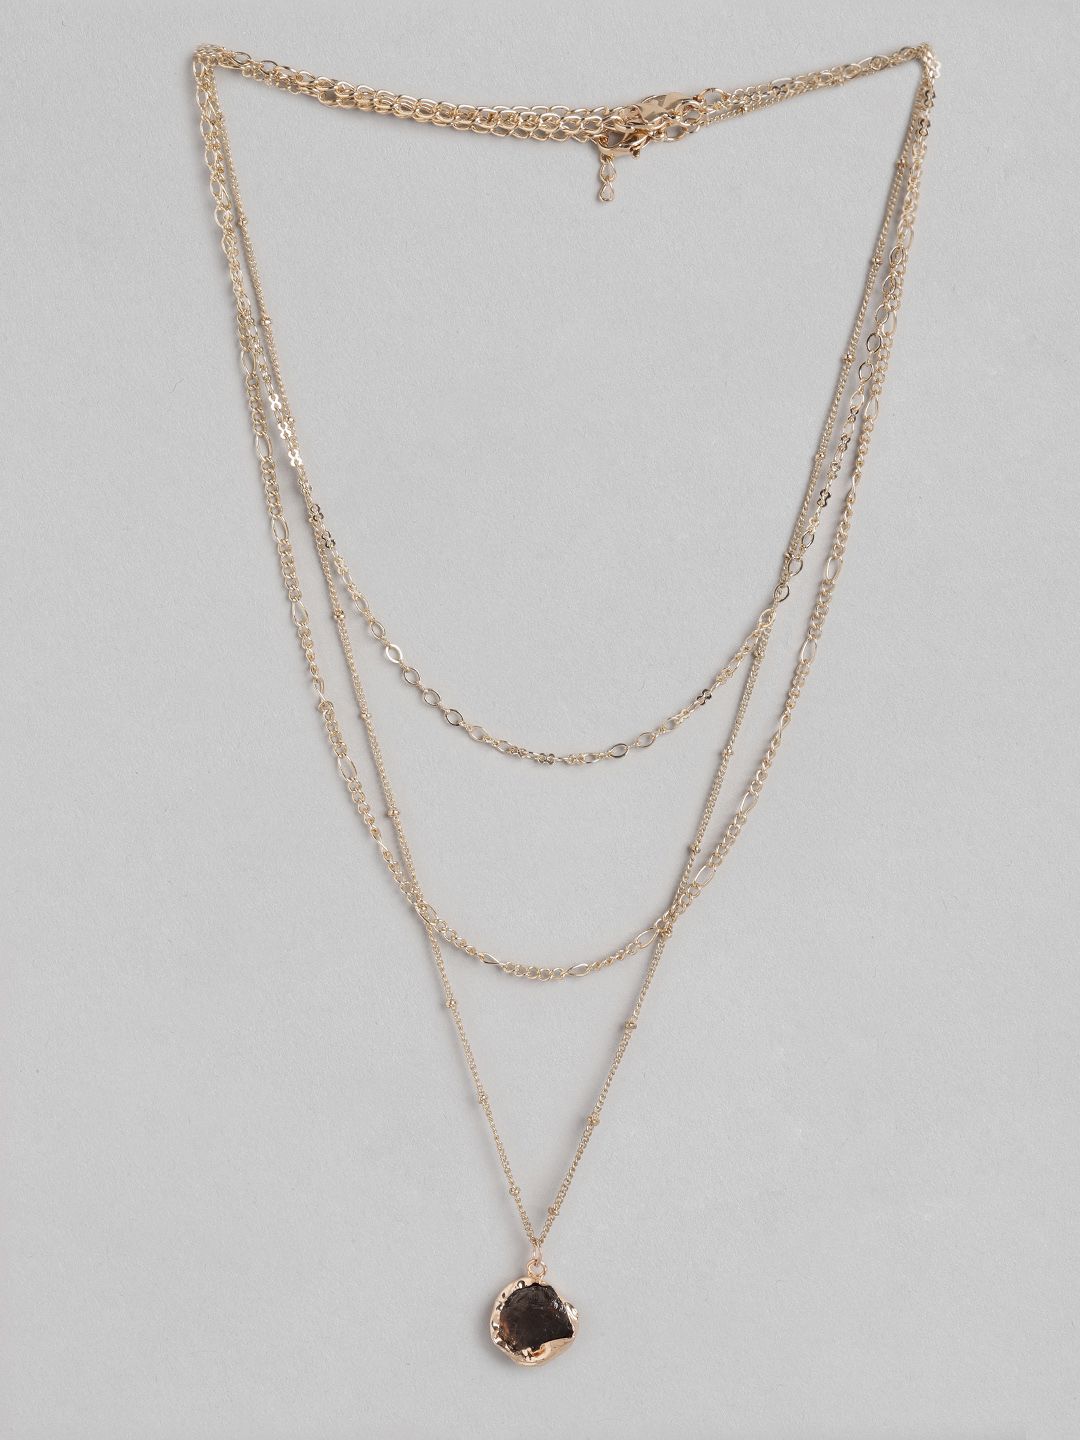 DressBerry Set of 3 Gold-Toned Stone Studded Layered Linked Necklaces Price in India